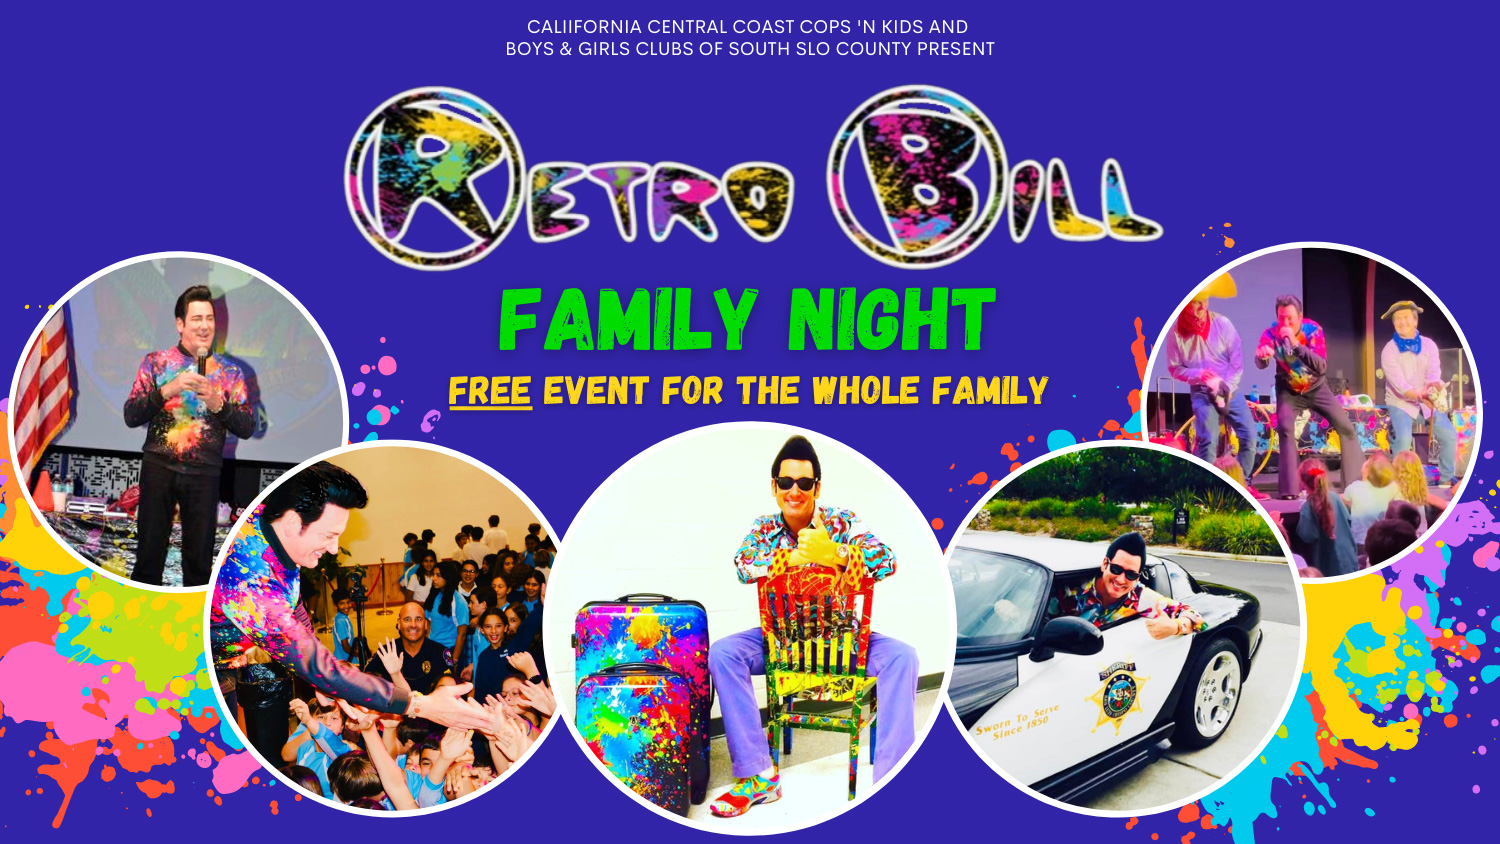 Retro Bill Family Night: Composite of Cops 'n Kids and Boys & Girls Clubs of South San Luis Obispo County with images of Retro Bill performing